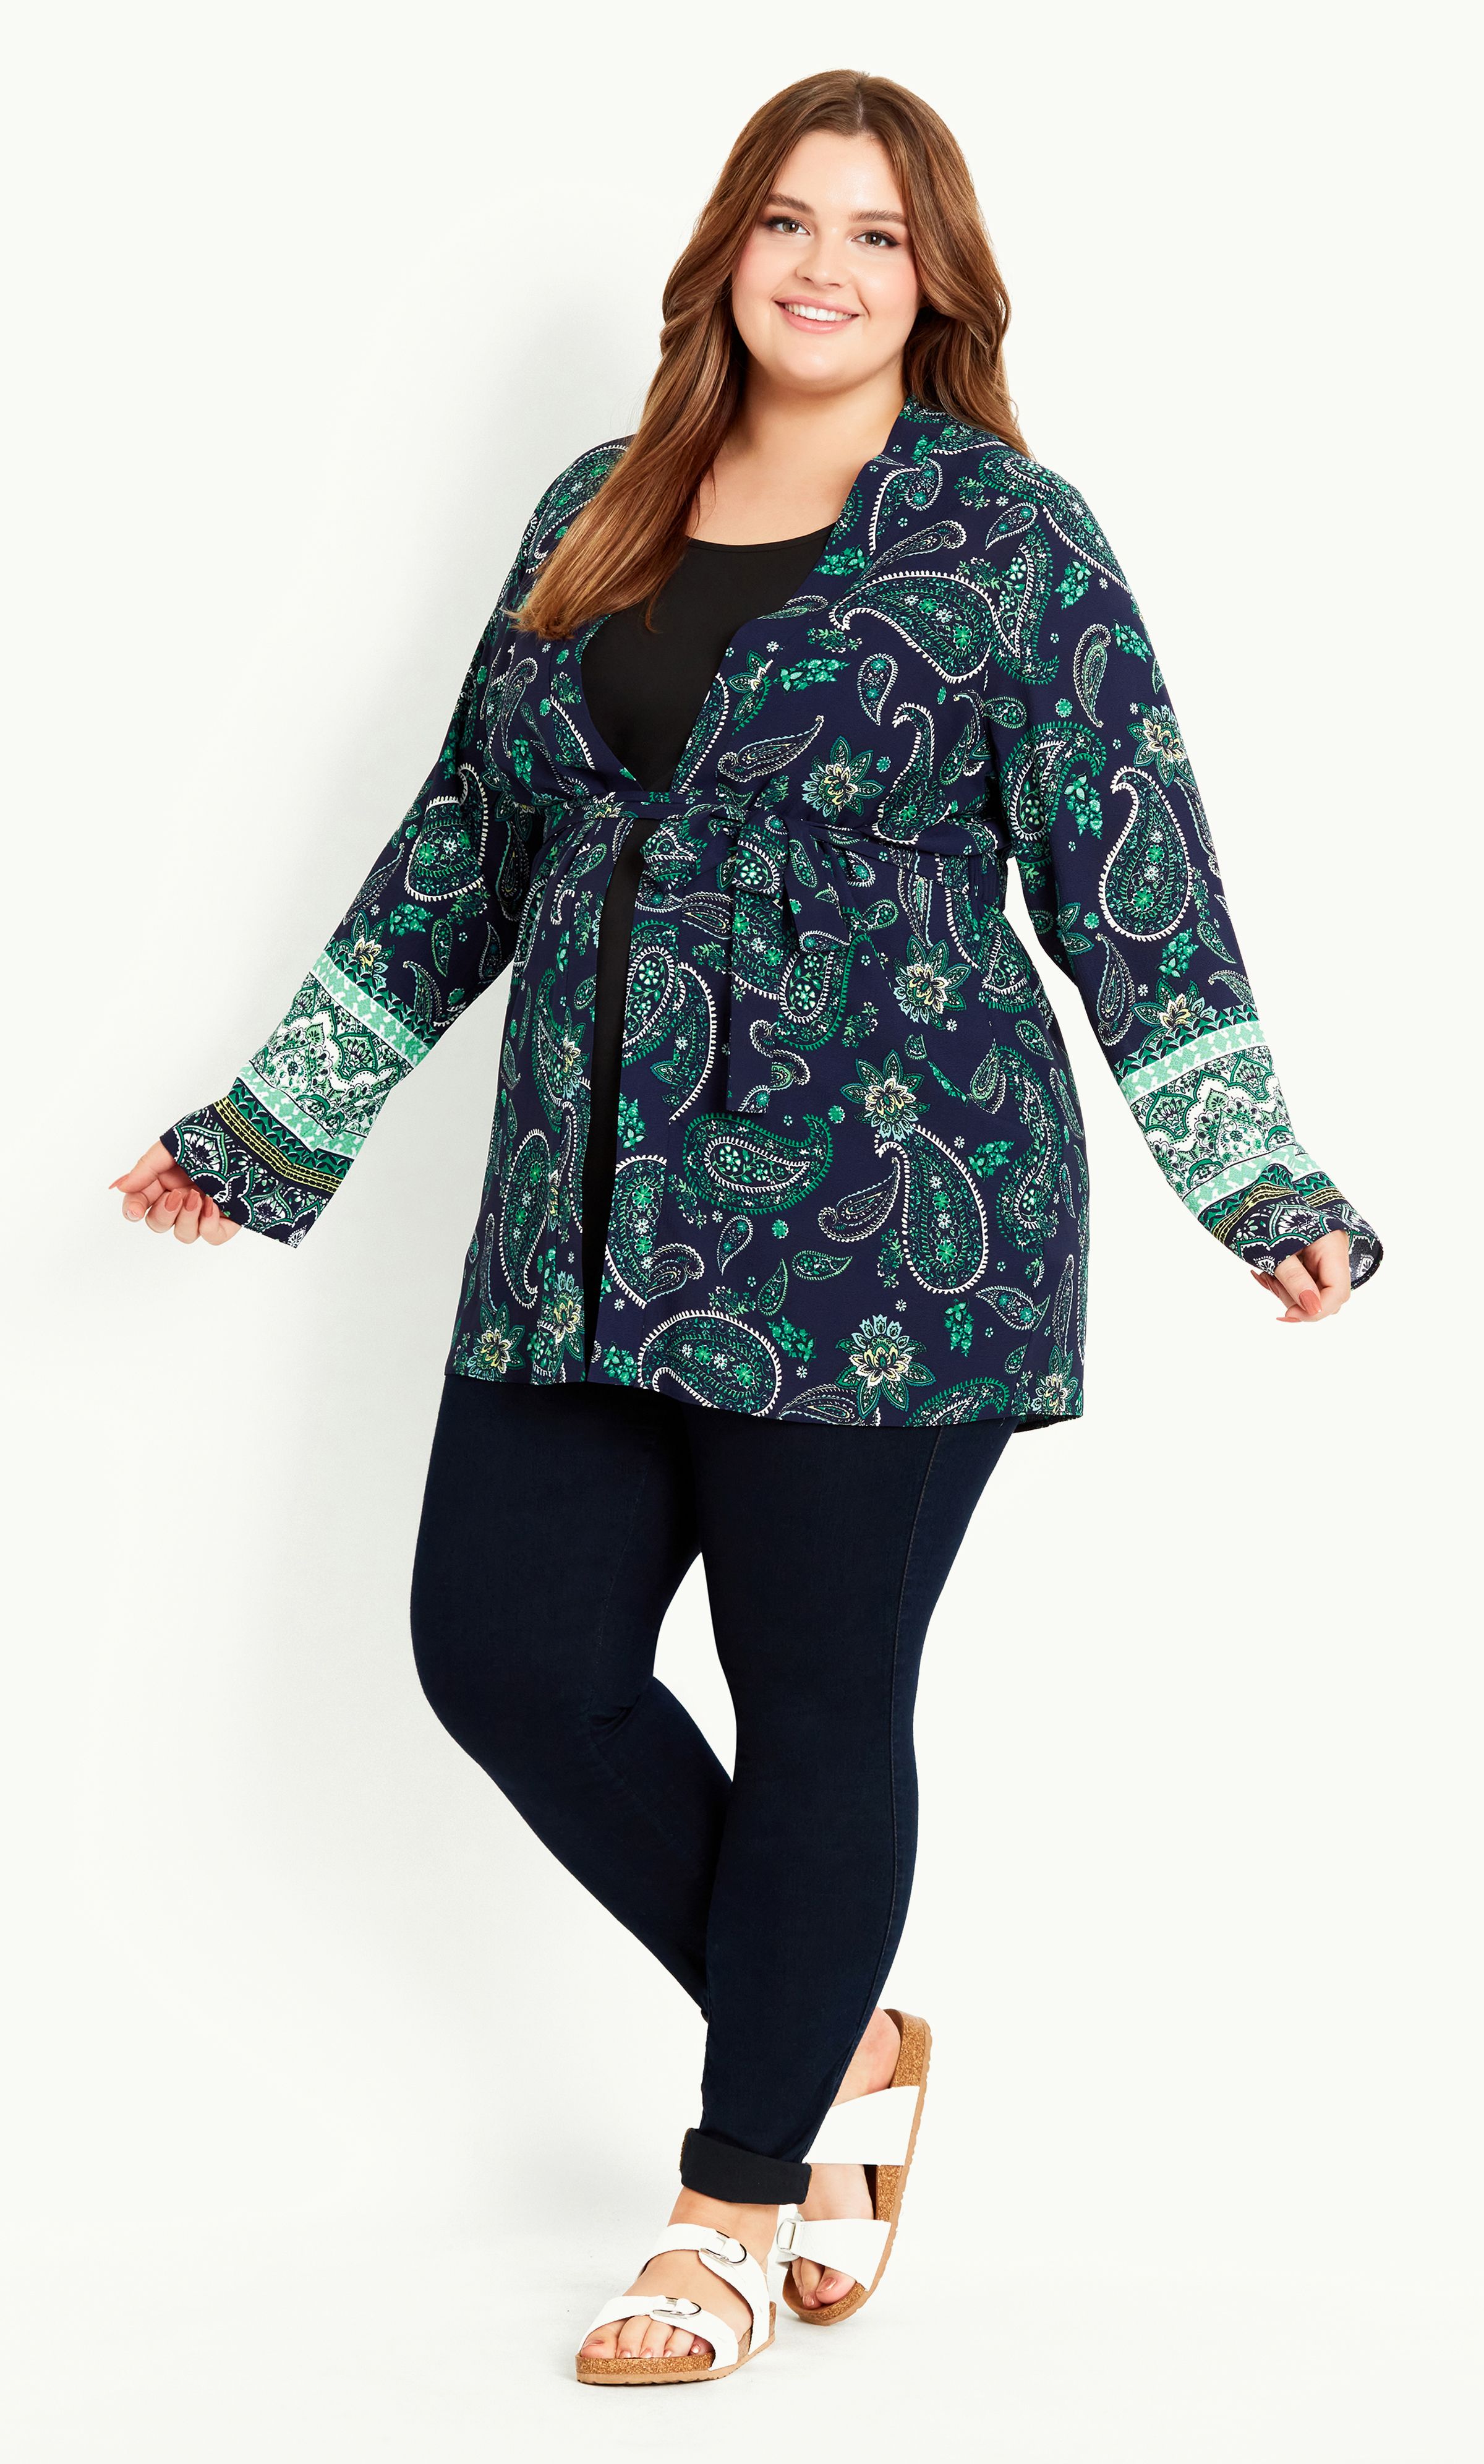 A whimsical layer to your casual outfit! The Paisley Print Kimono features a floaty, lightweight fabrication and eye-catching paisley print, perfect for bringing added style and a pop of print. Elevated by flared sleeves, it's a fun-loving choice for the summer! Key Features Include: - Long flared sleeves - Attached self-tie front - Elasticated back waist - Lightweight non-stretch fabrication - Relaxed fit - Unlined - Hip length Layer over a black tee and jeans, finishing with chunky sandals and a tote.